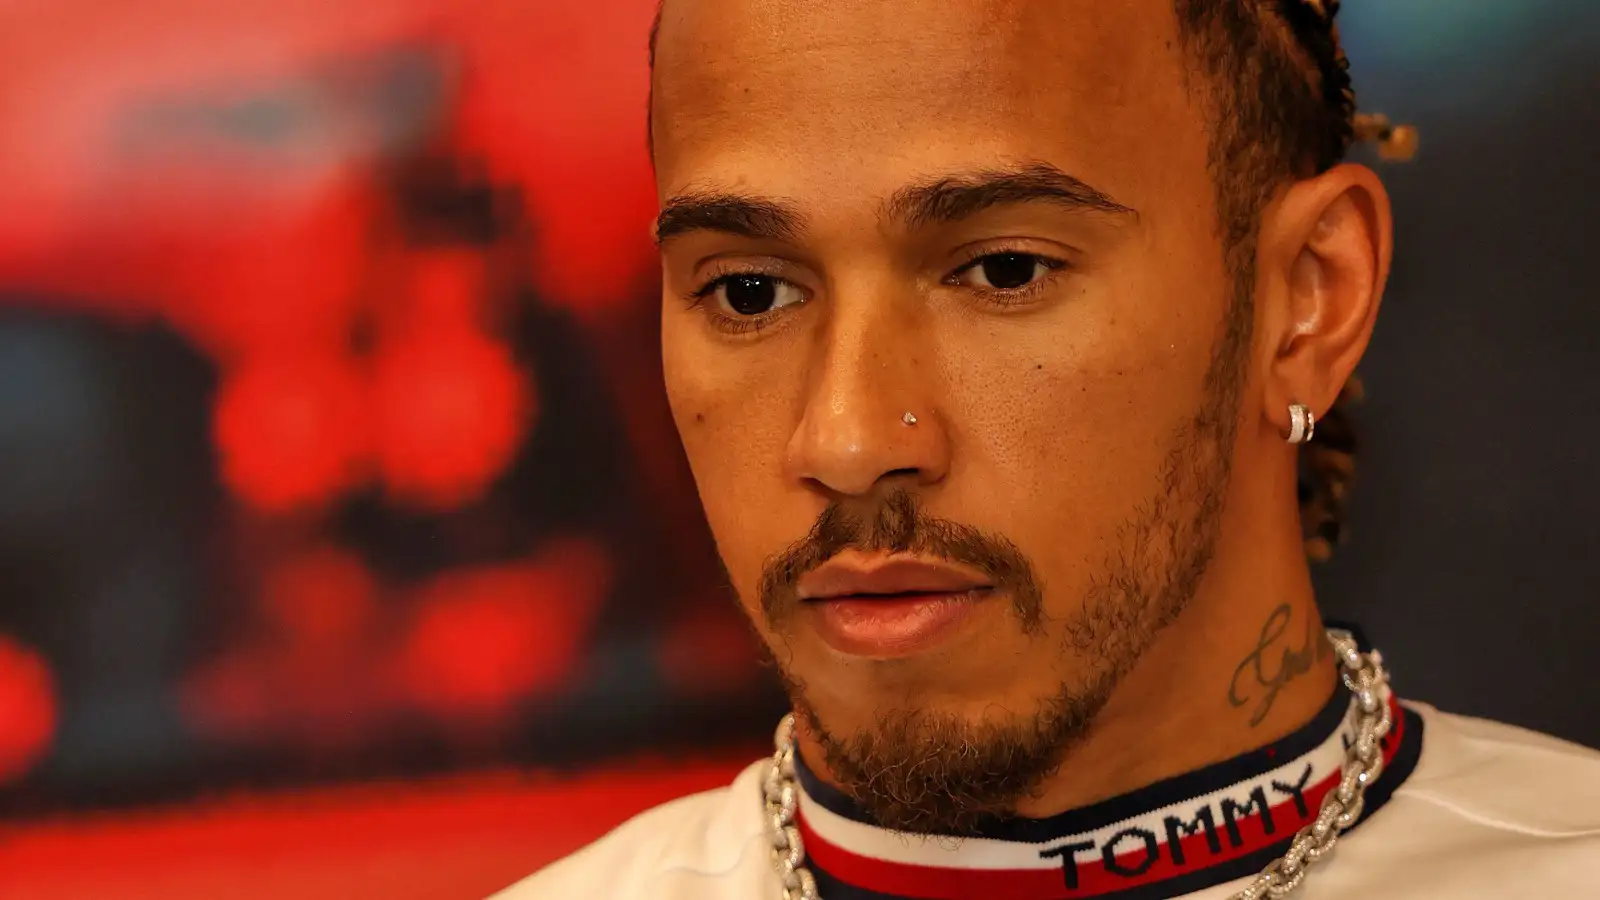 Lewis Hamilton looking serious in the press conference. Monaco May 2022